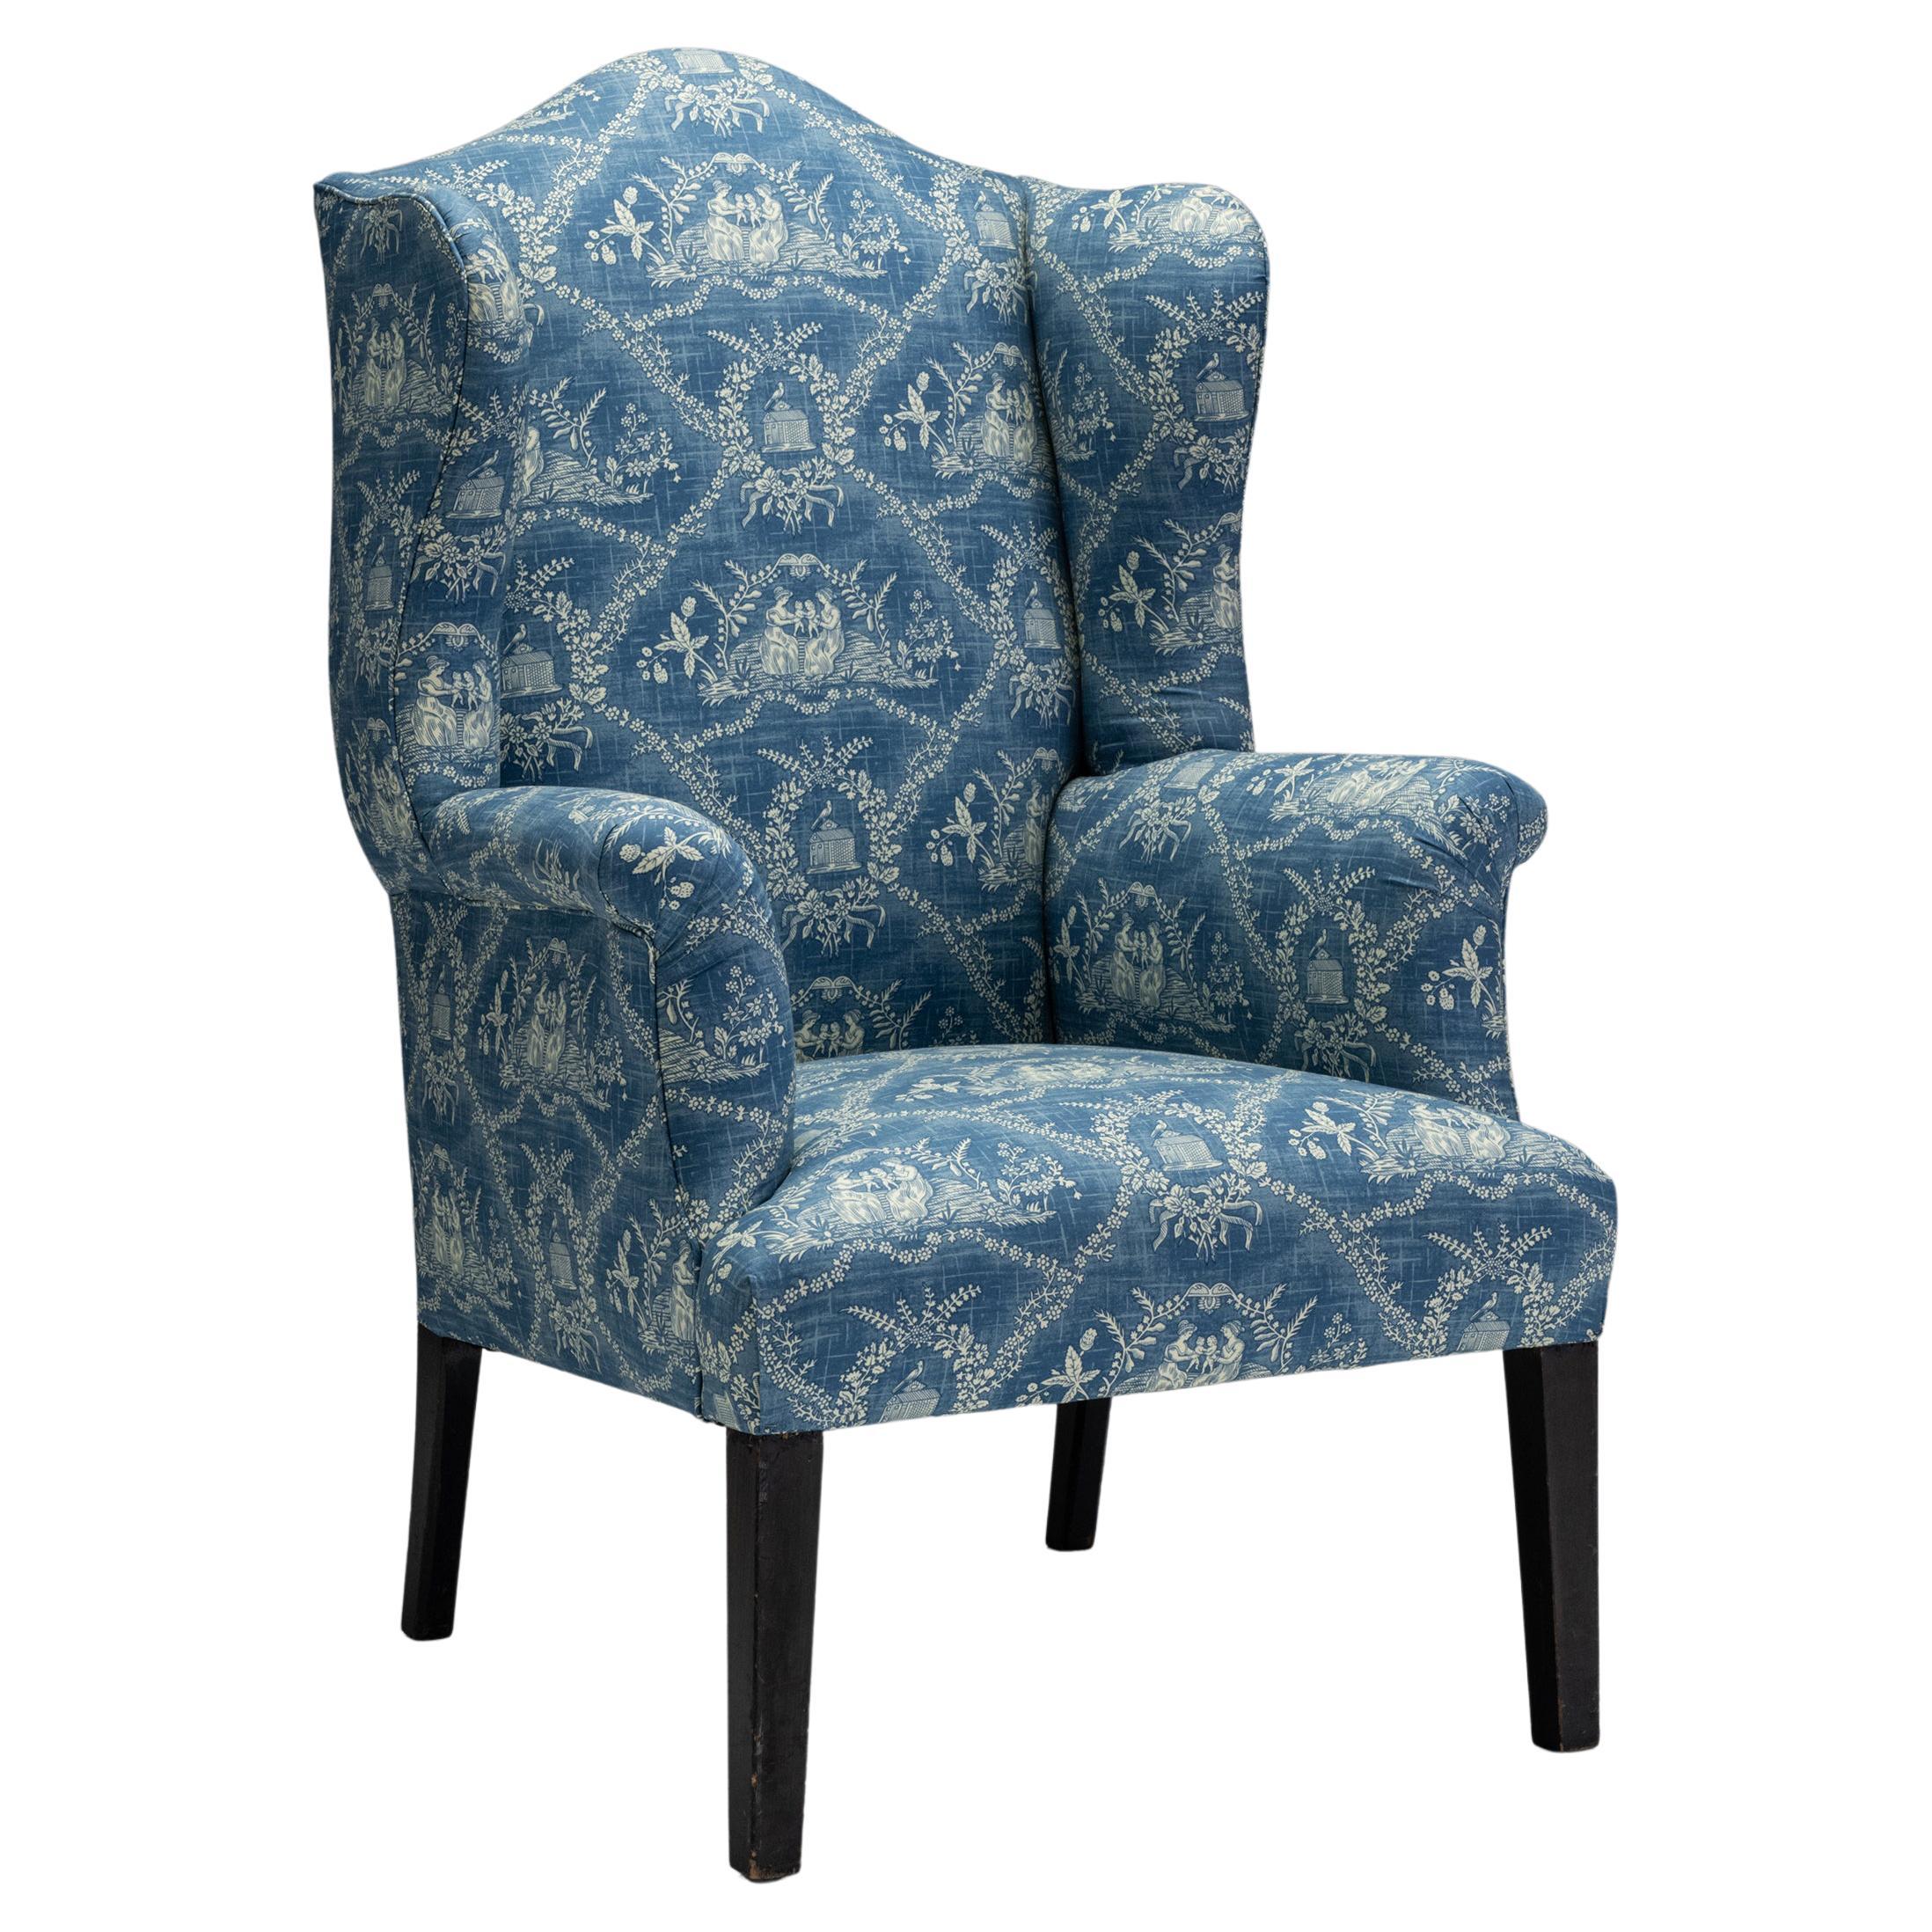 Georgian Wingback Armchair in 100% Cotton Toile Fabric from Pierre Frey